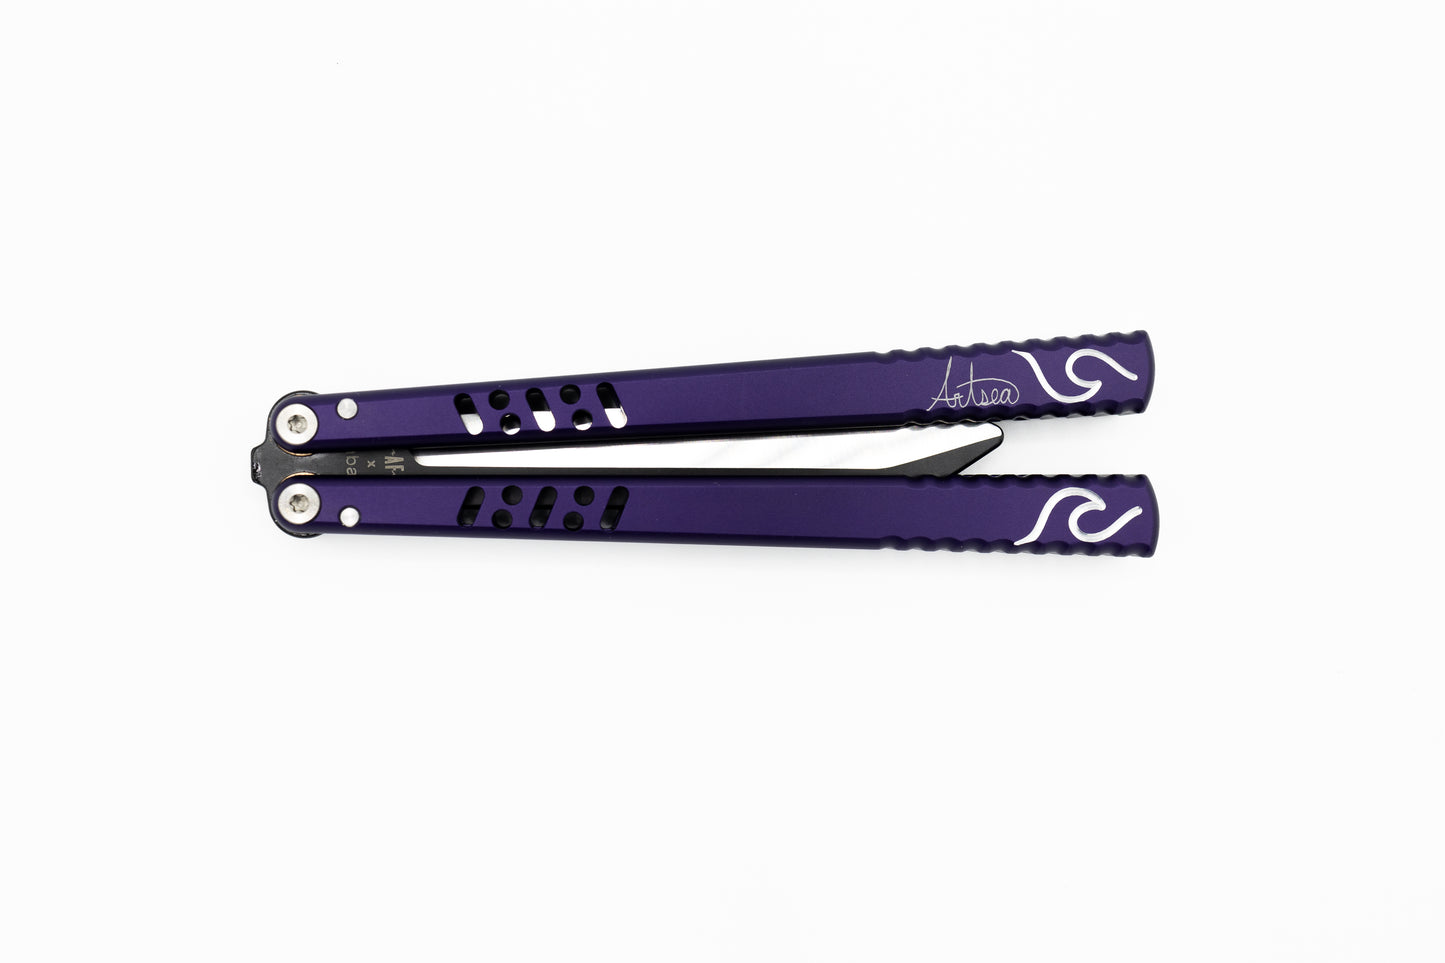 The Wave Balisong Trainer